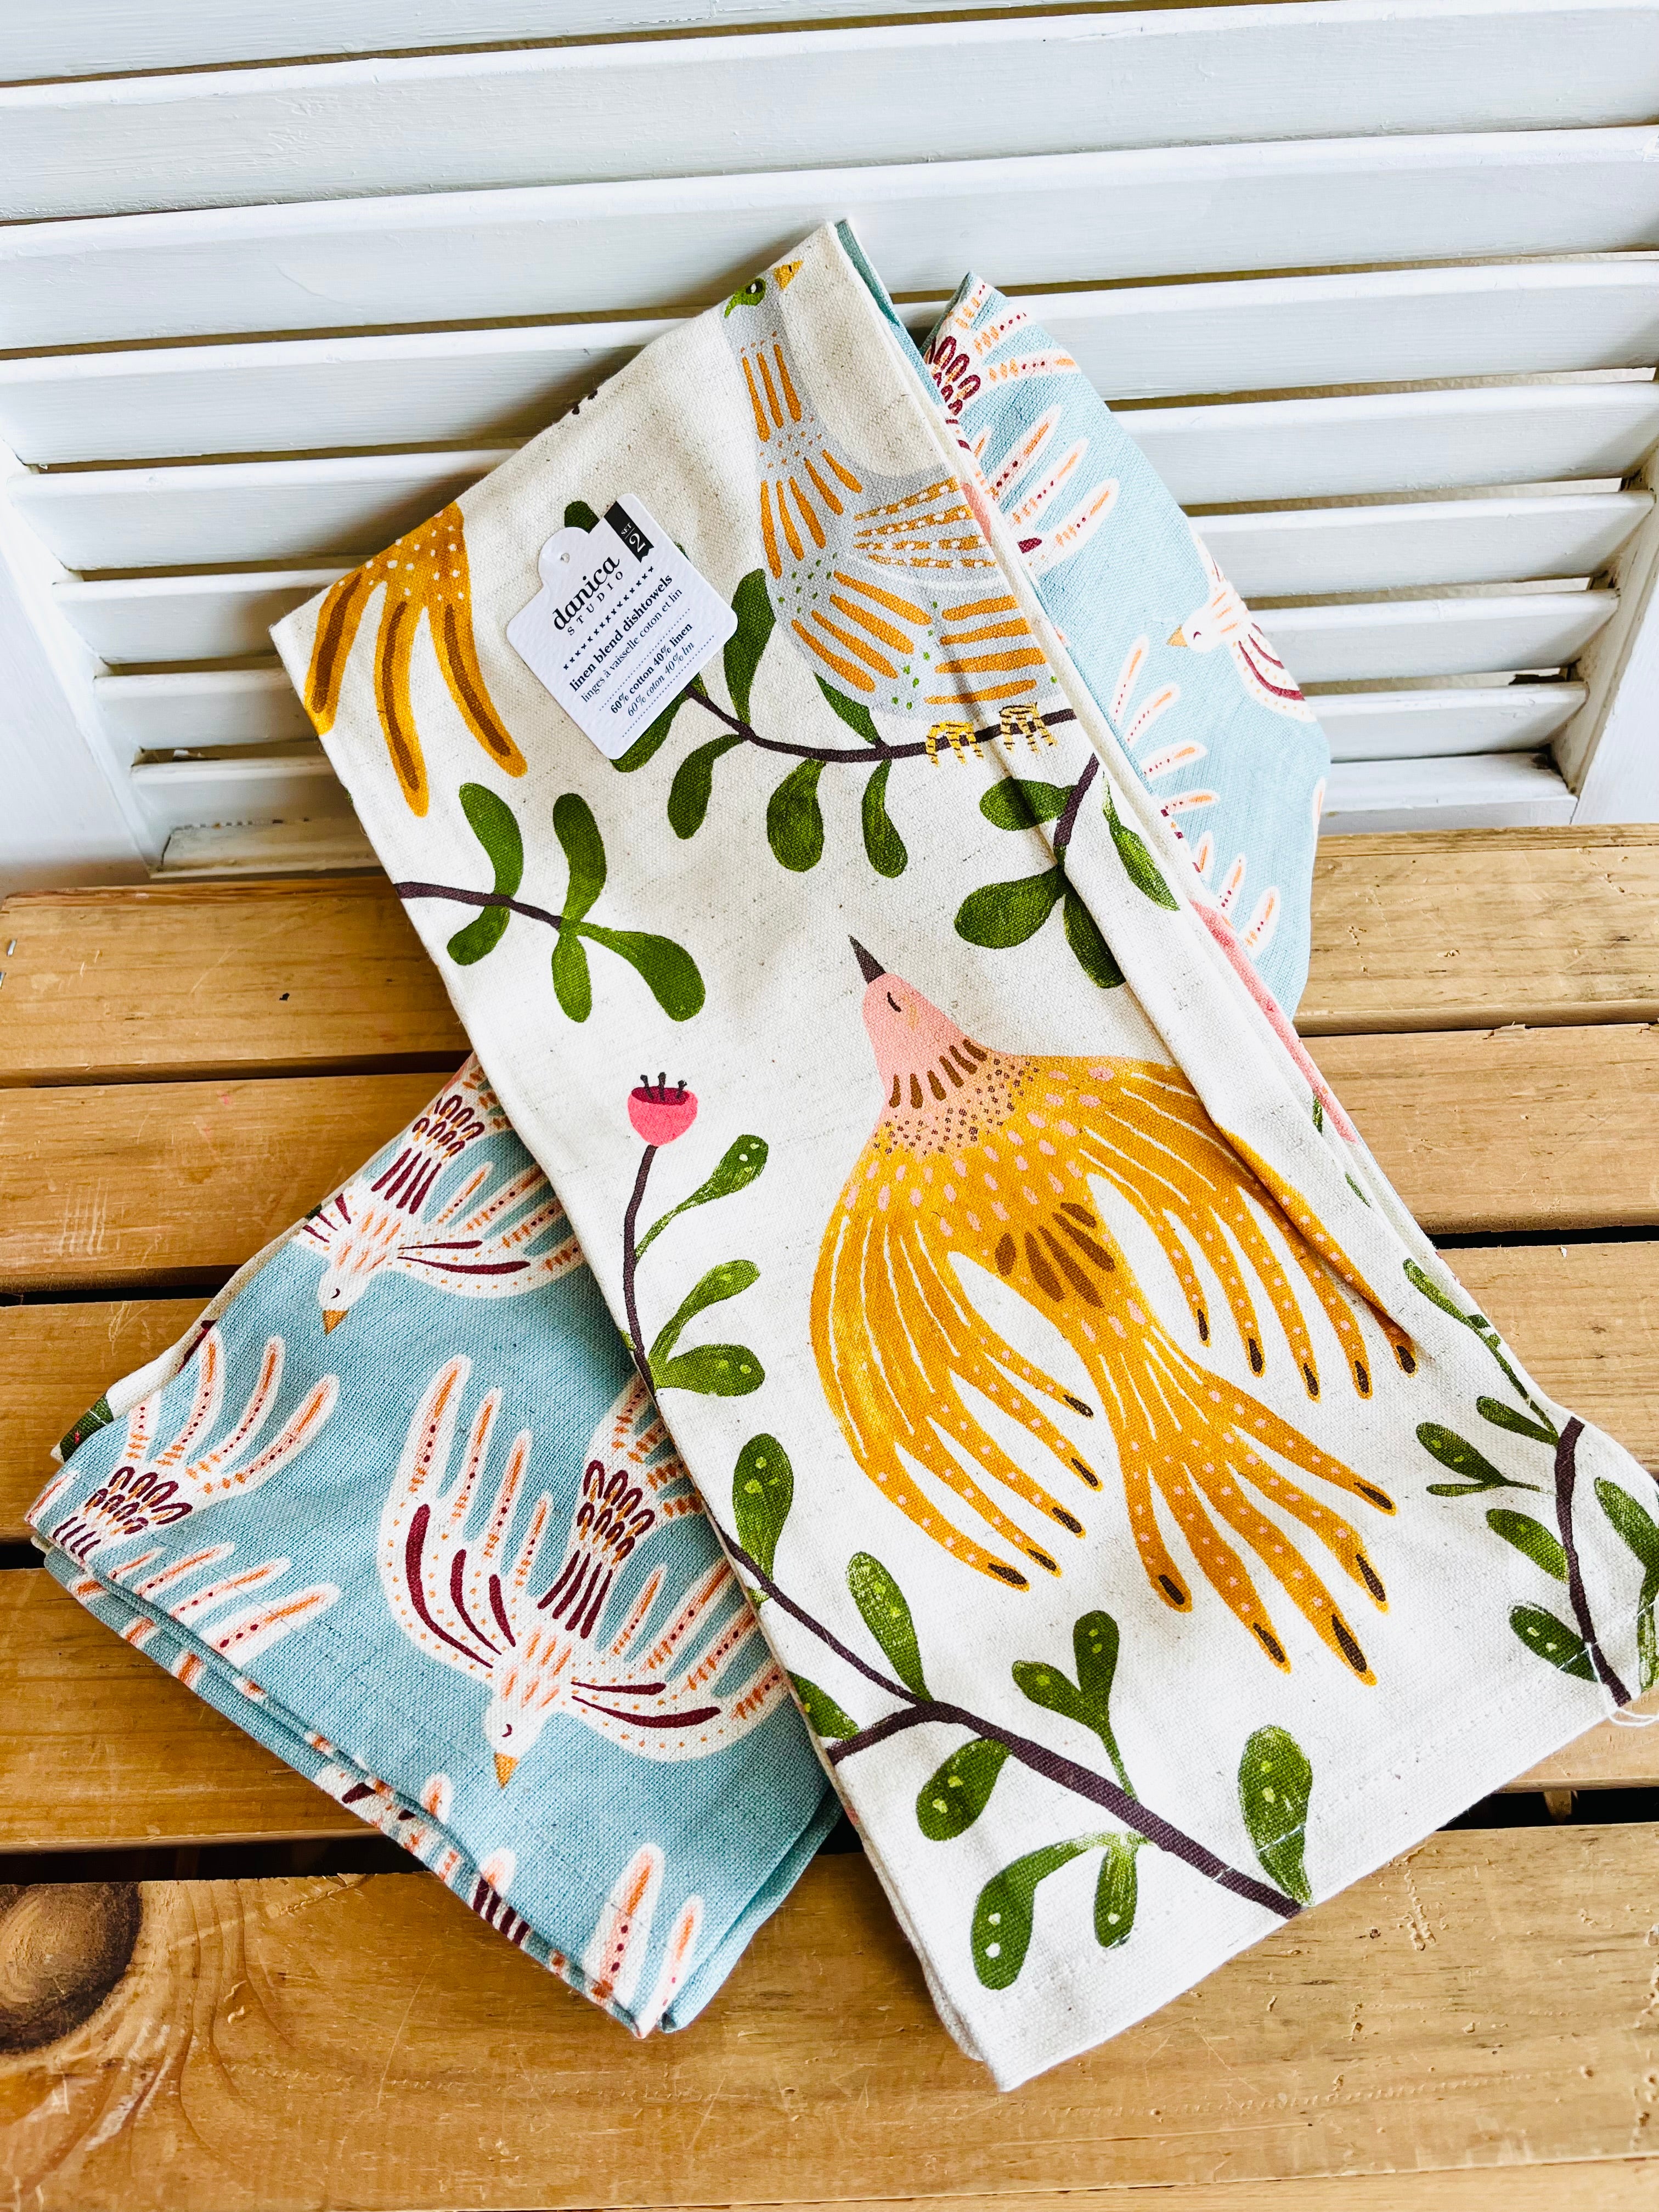 Plume - Dish towels from Danica